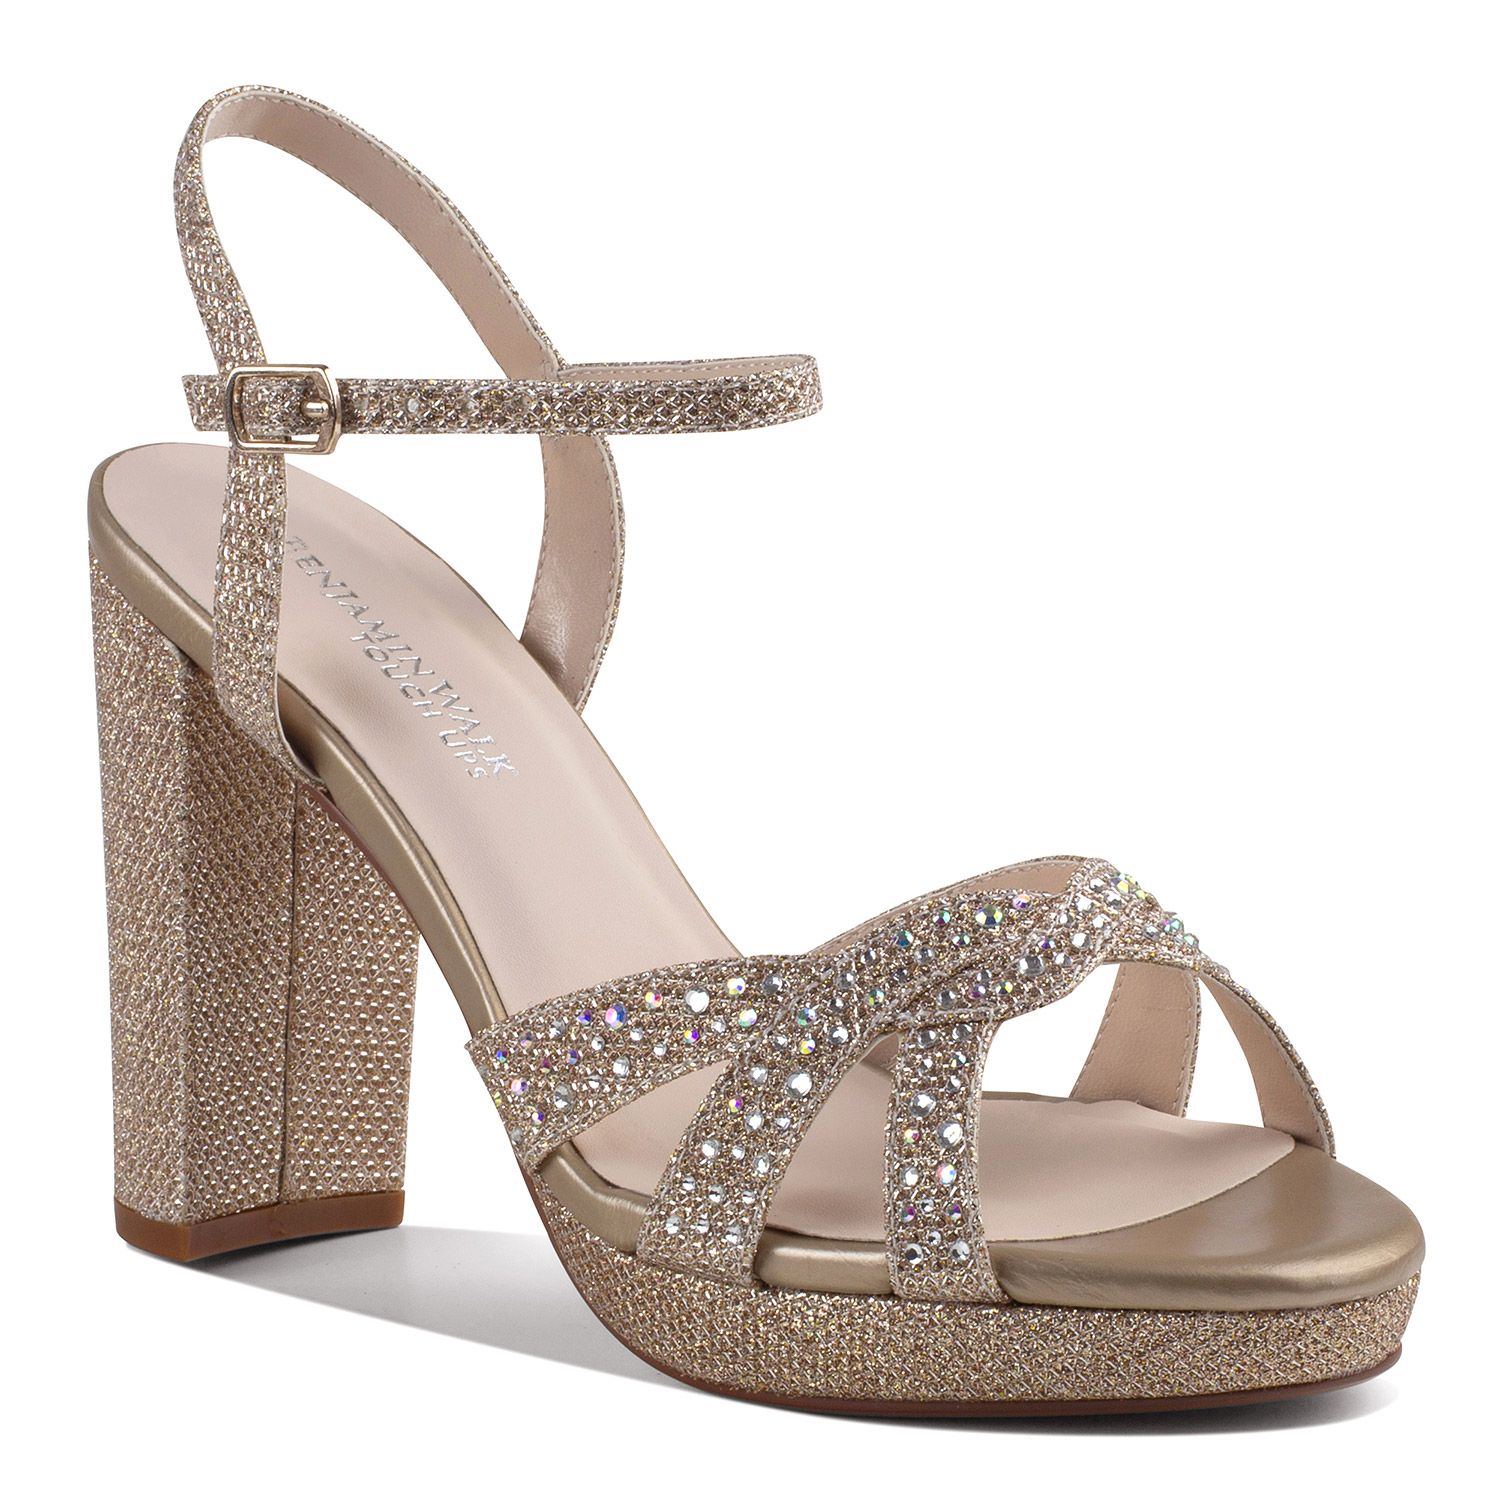 Champagne glitter platform shoe with 3.75 heel with open toe.